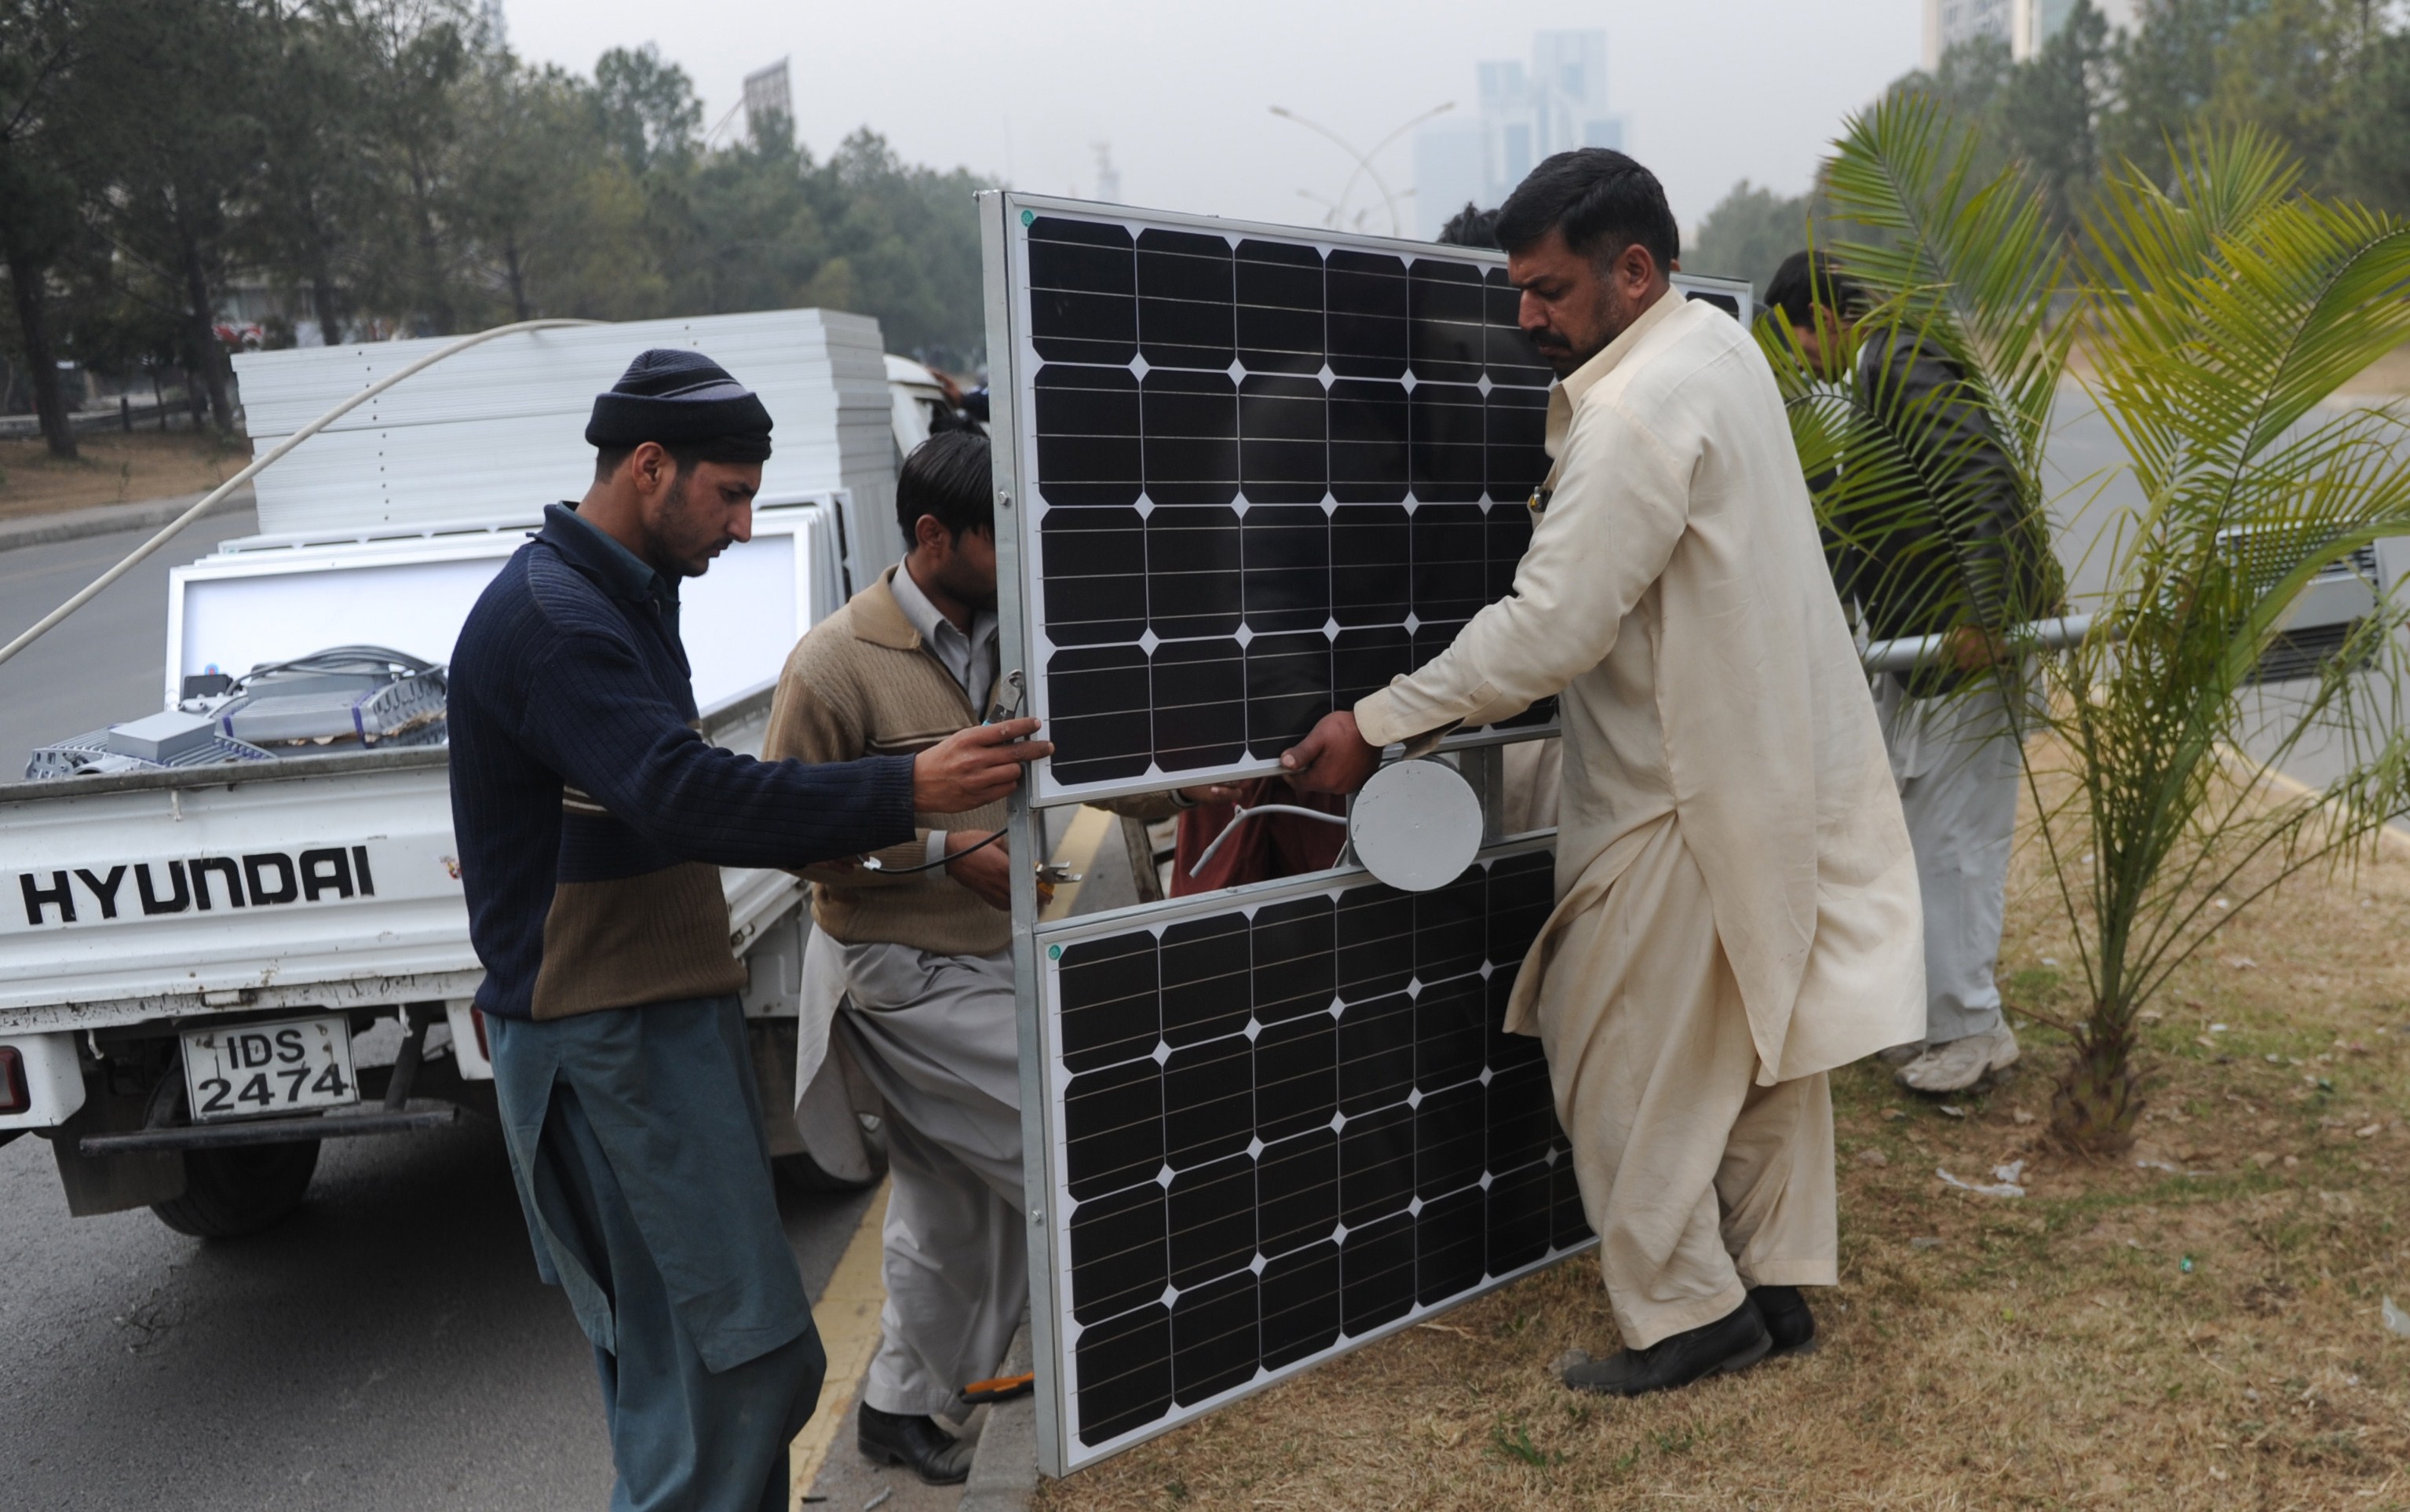 Is Pakistan's solar power poised to take off amid energy crisis?